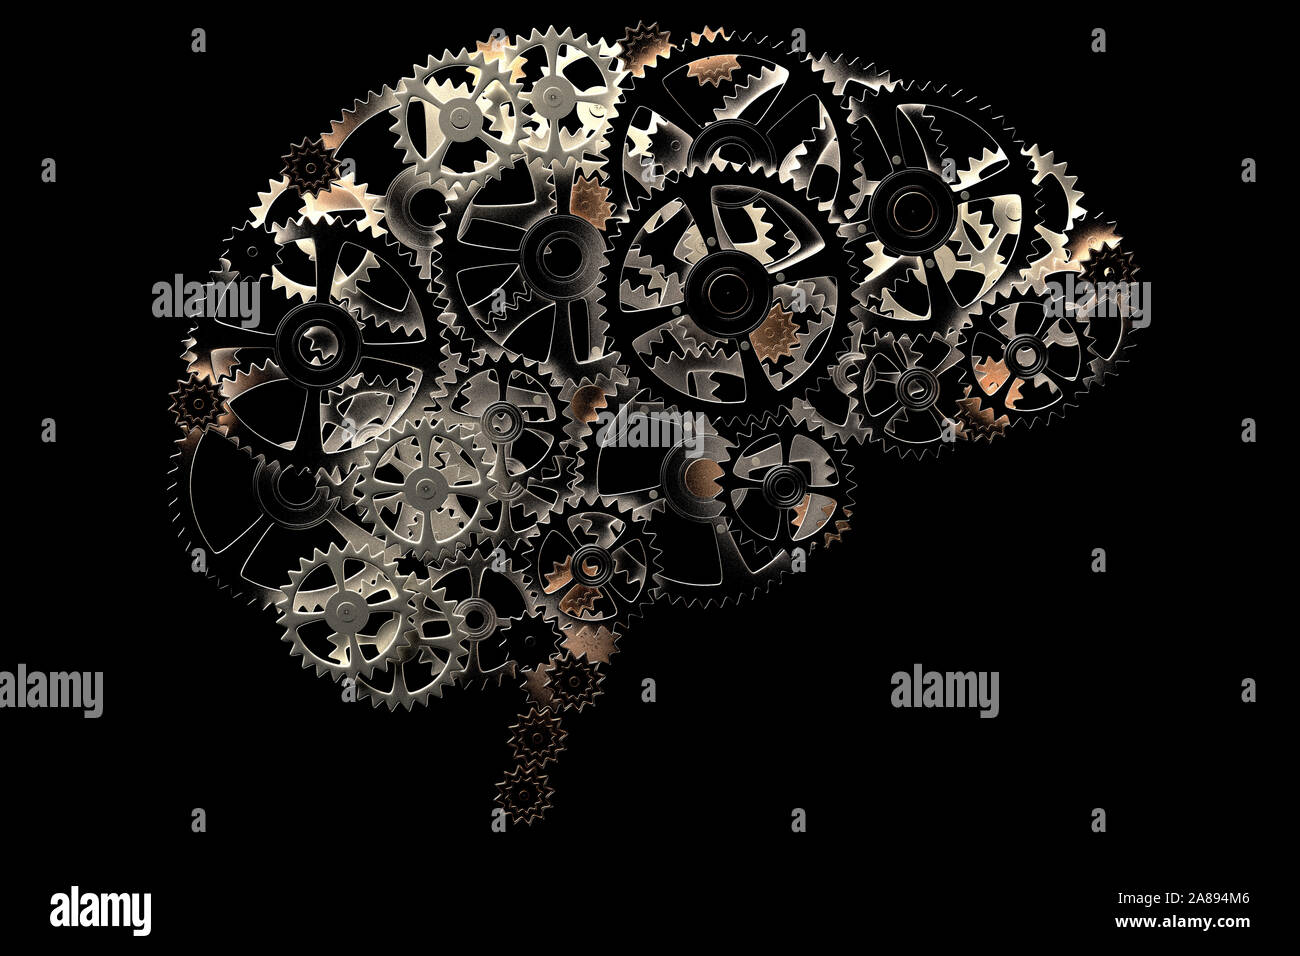 3D rendering of a conceptual image of a human brain made of cogwheels Stock Photo